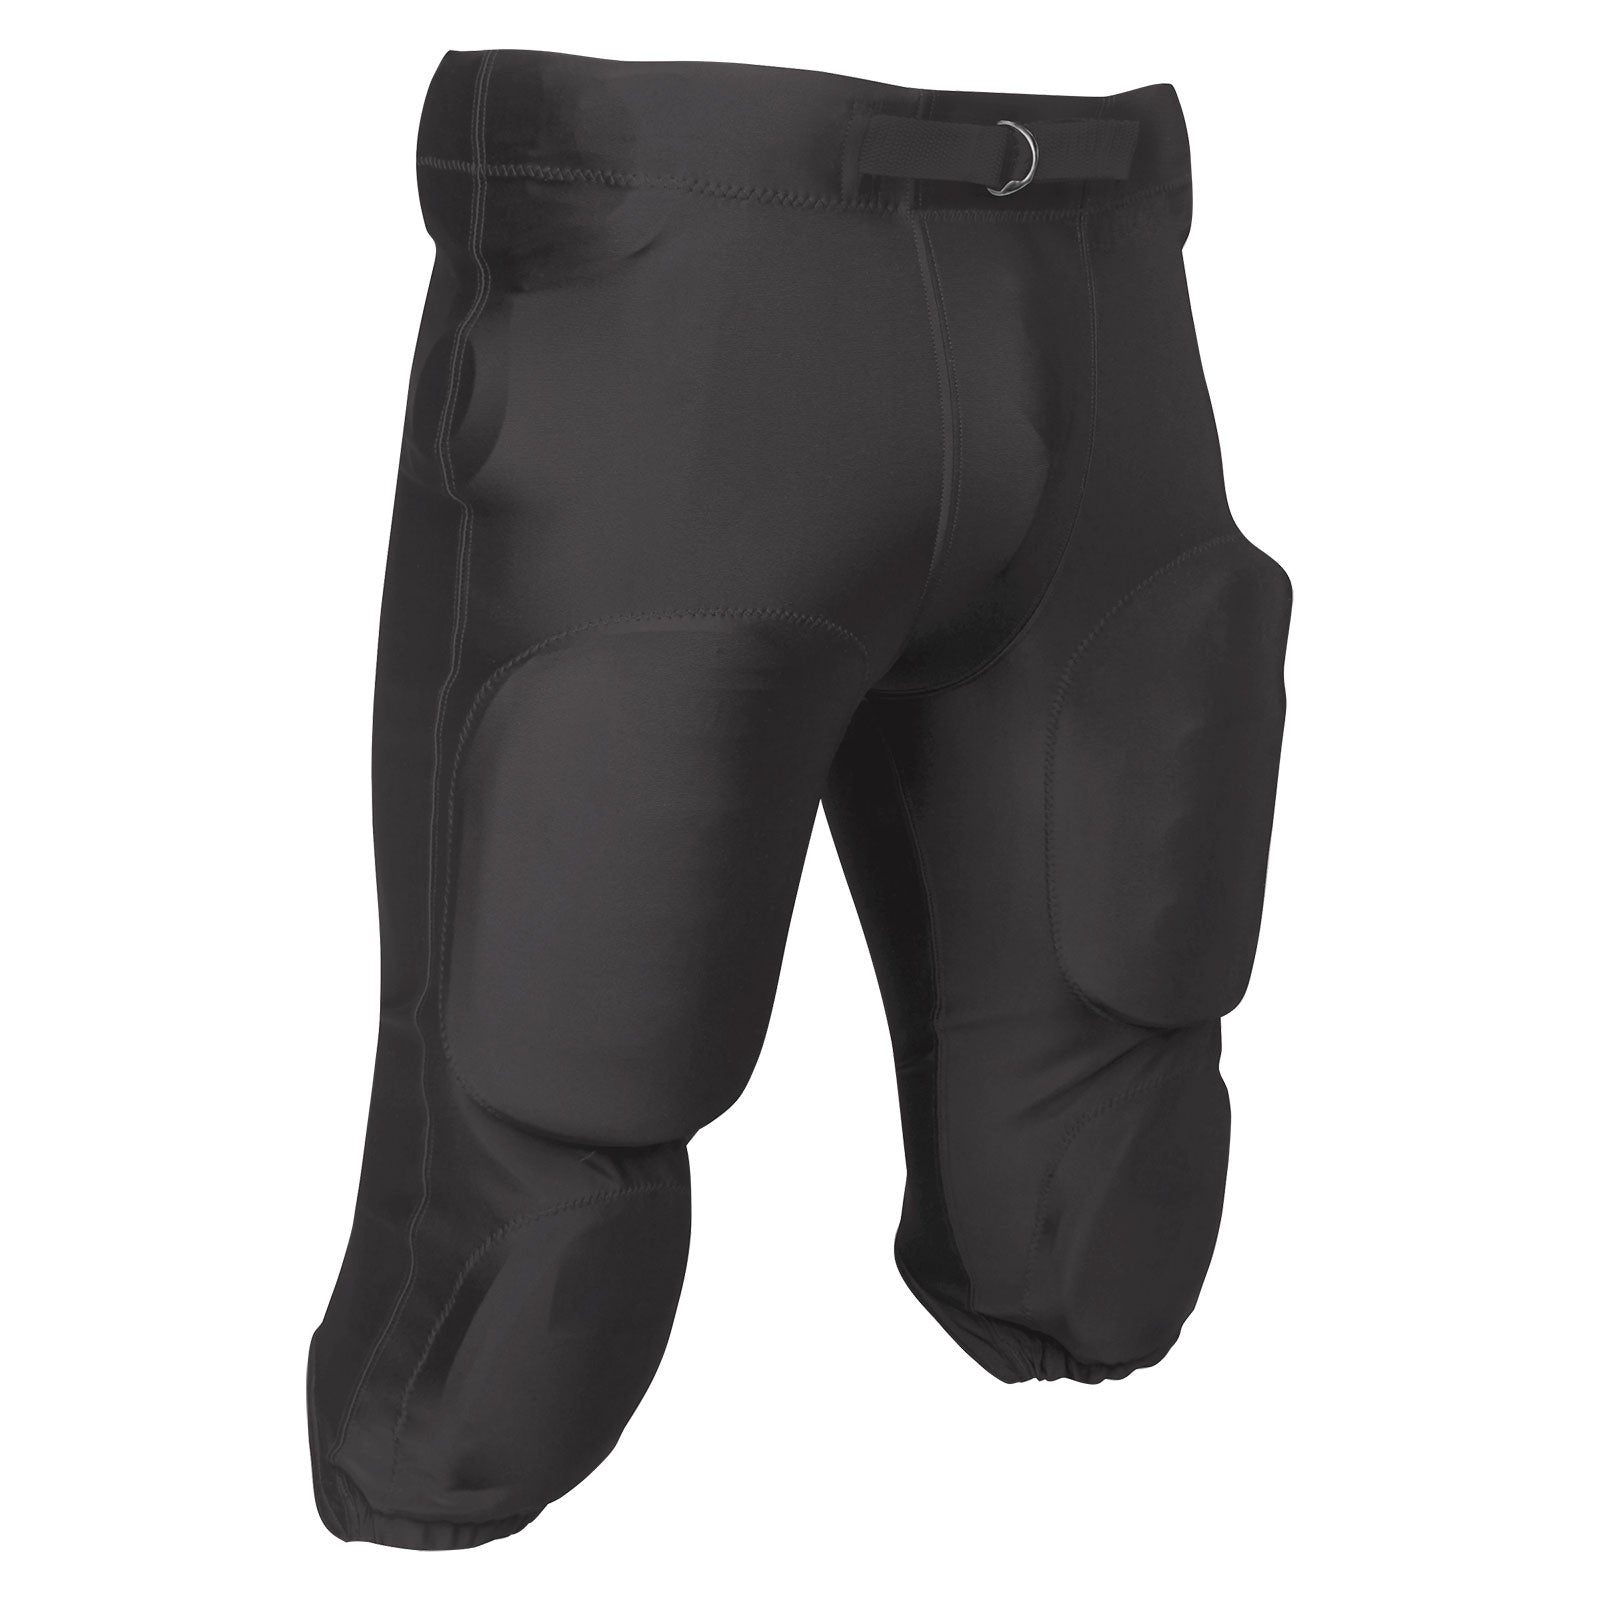 Traditional Football Pant With Pad Pockets BLACK BODY